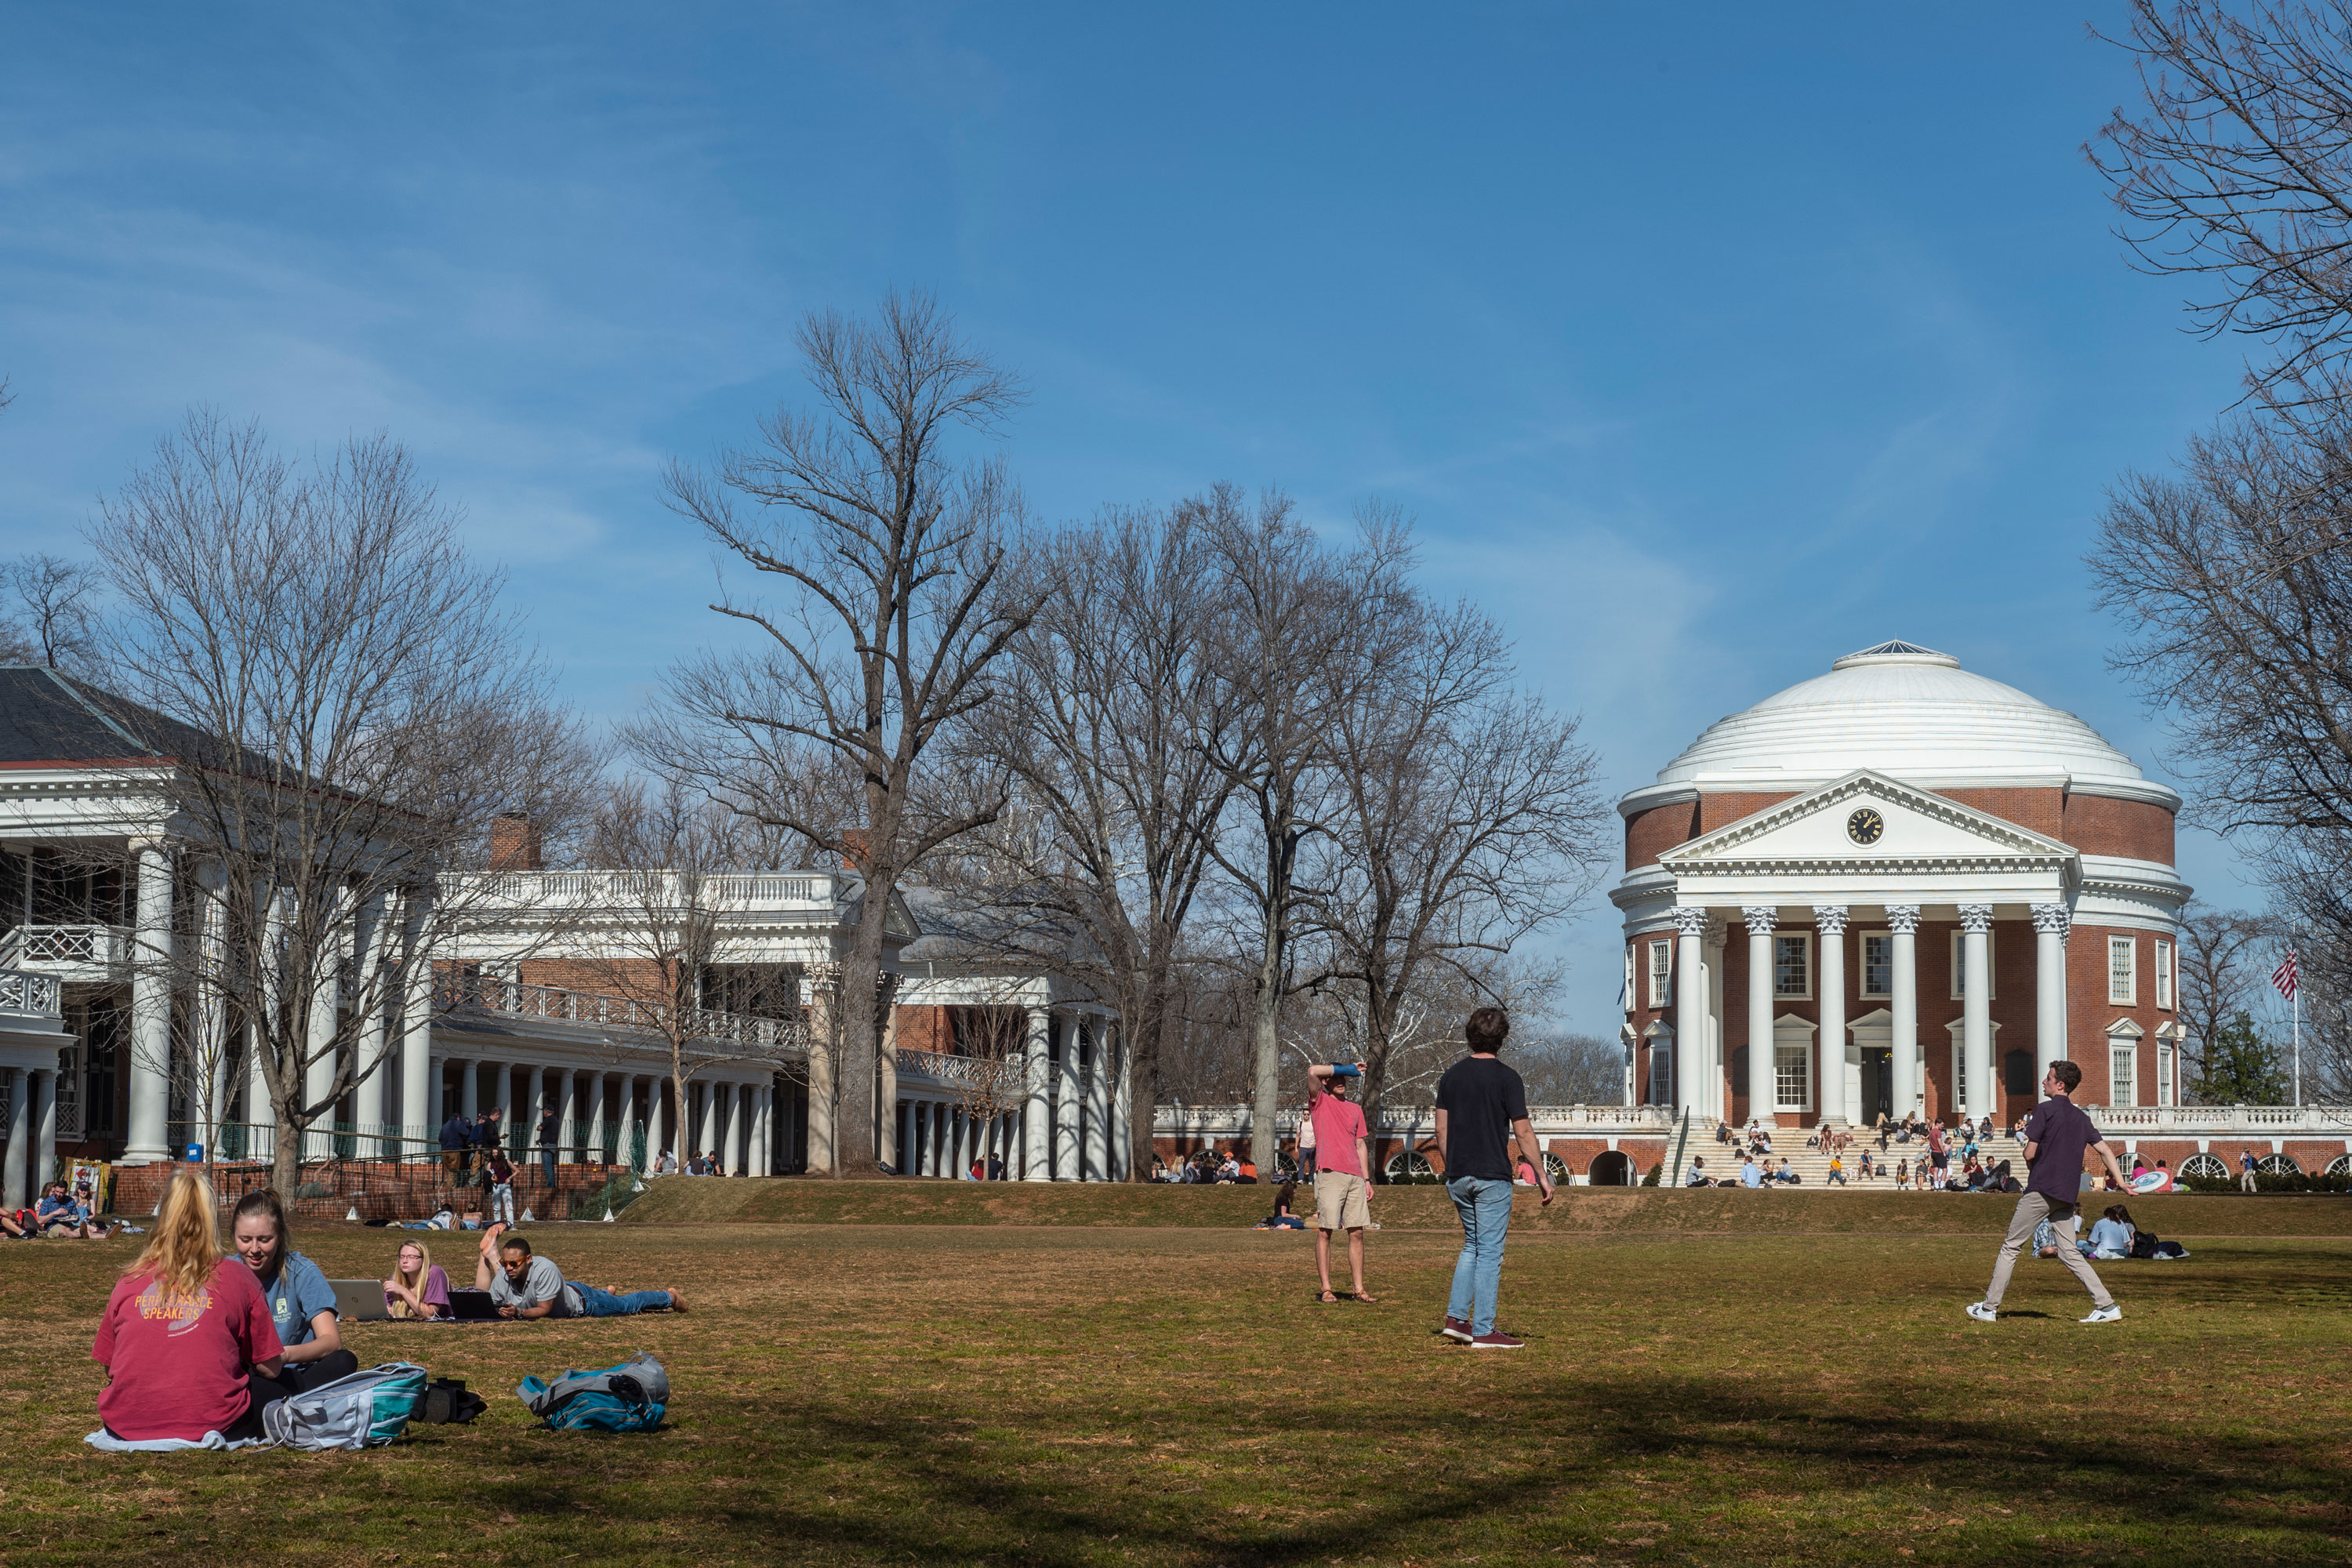 Students hanging out on the Lawn in front of the Rotunda